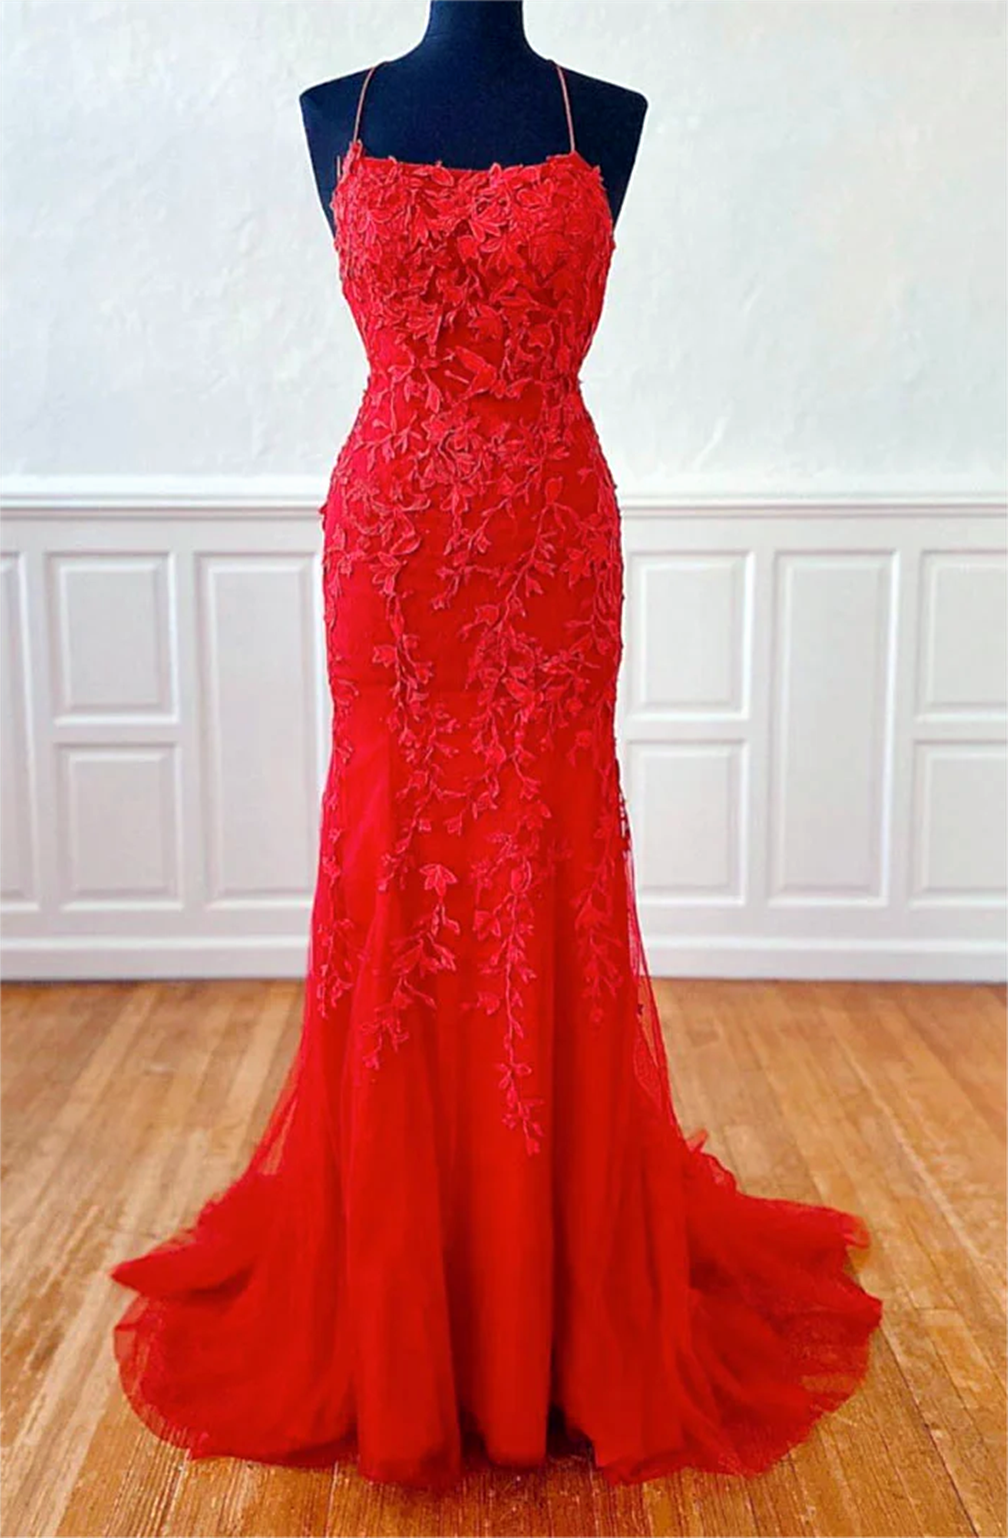 Women Lace Prom Dresses Long Appliques Evening Party Gowns Sleeveless Formal Dress Yp097